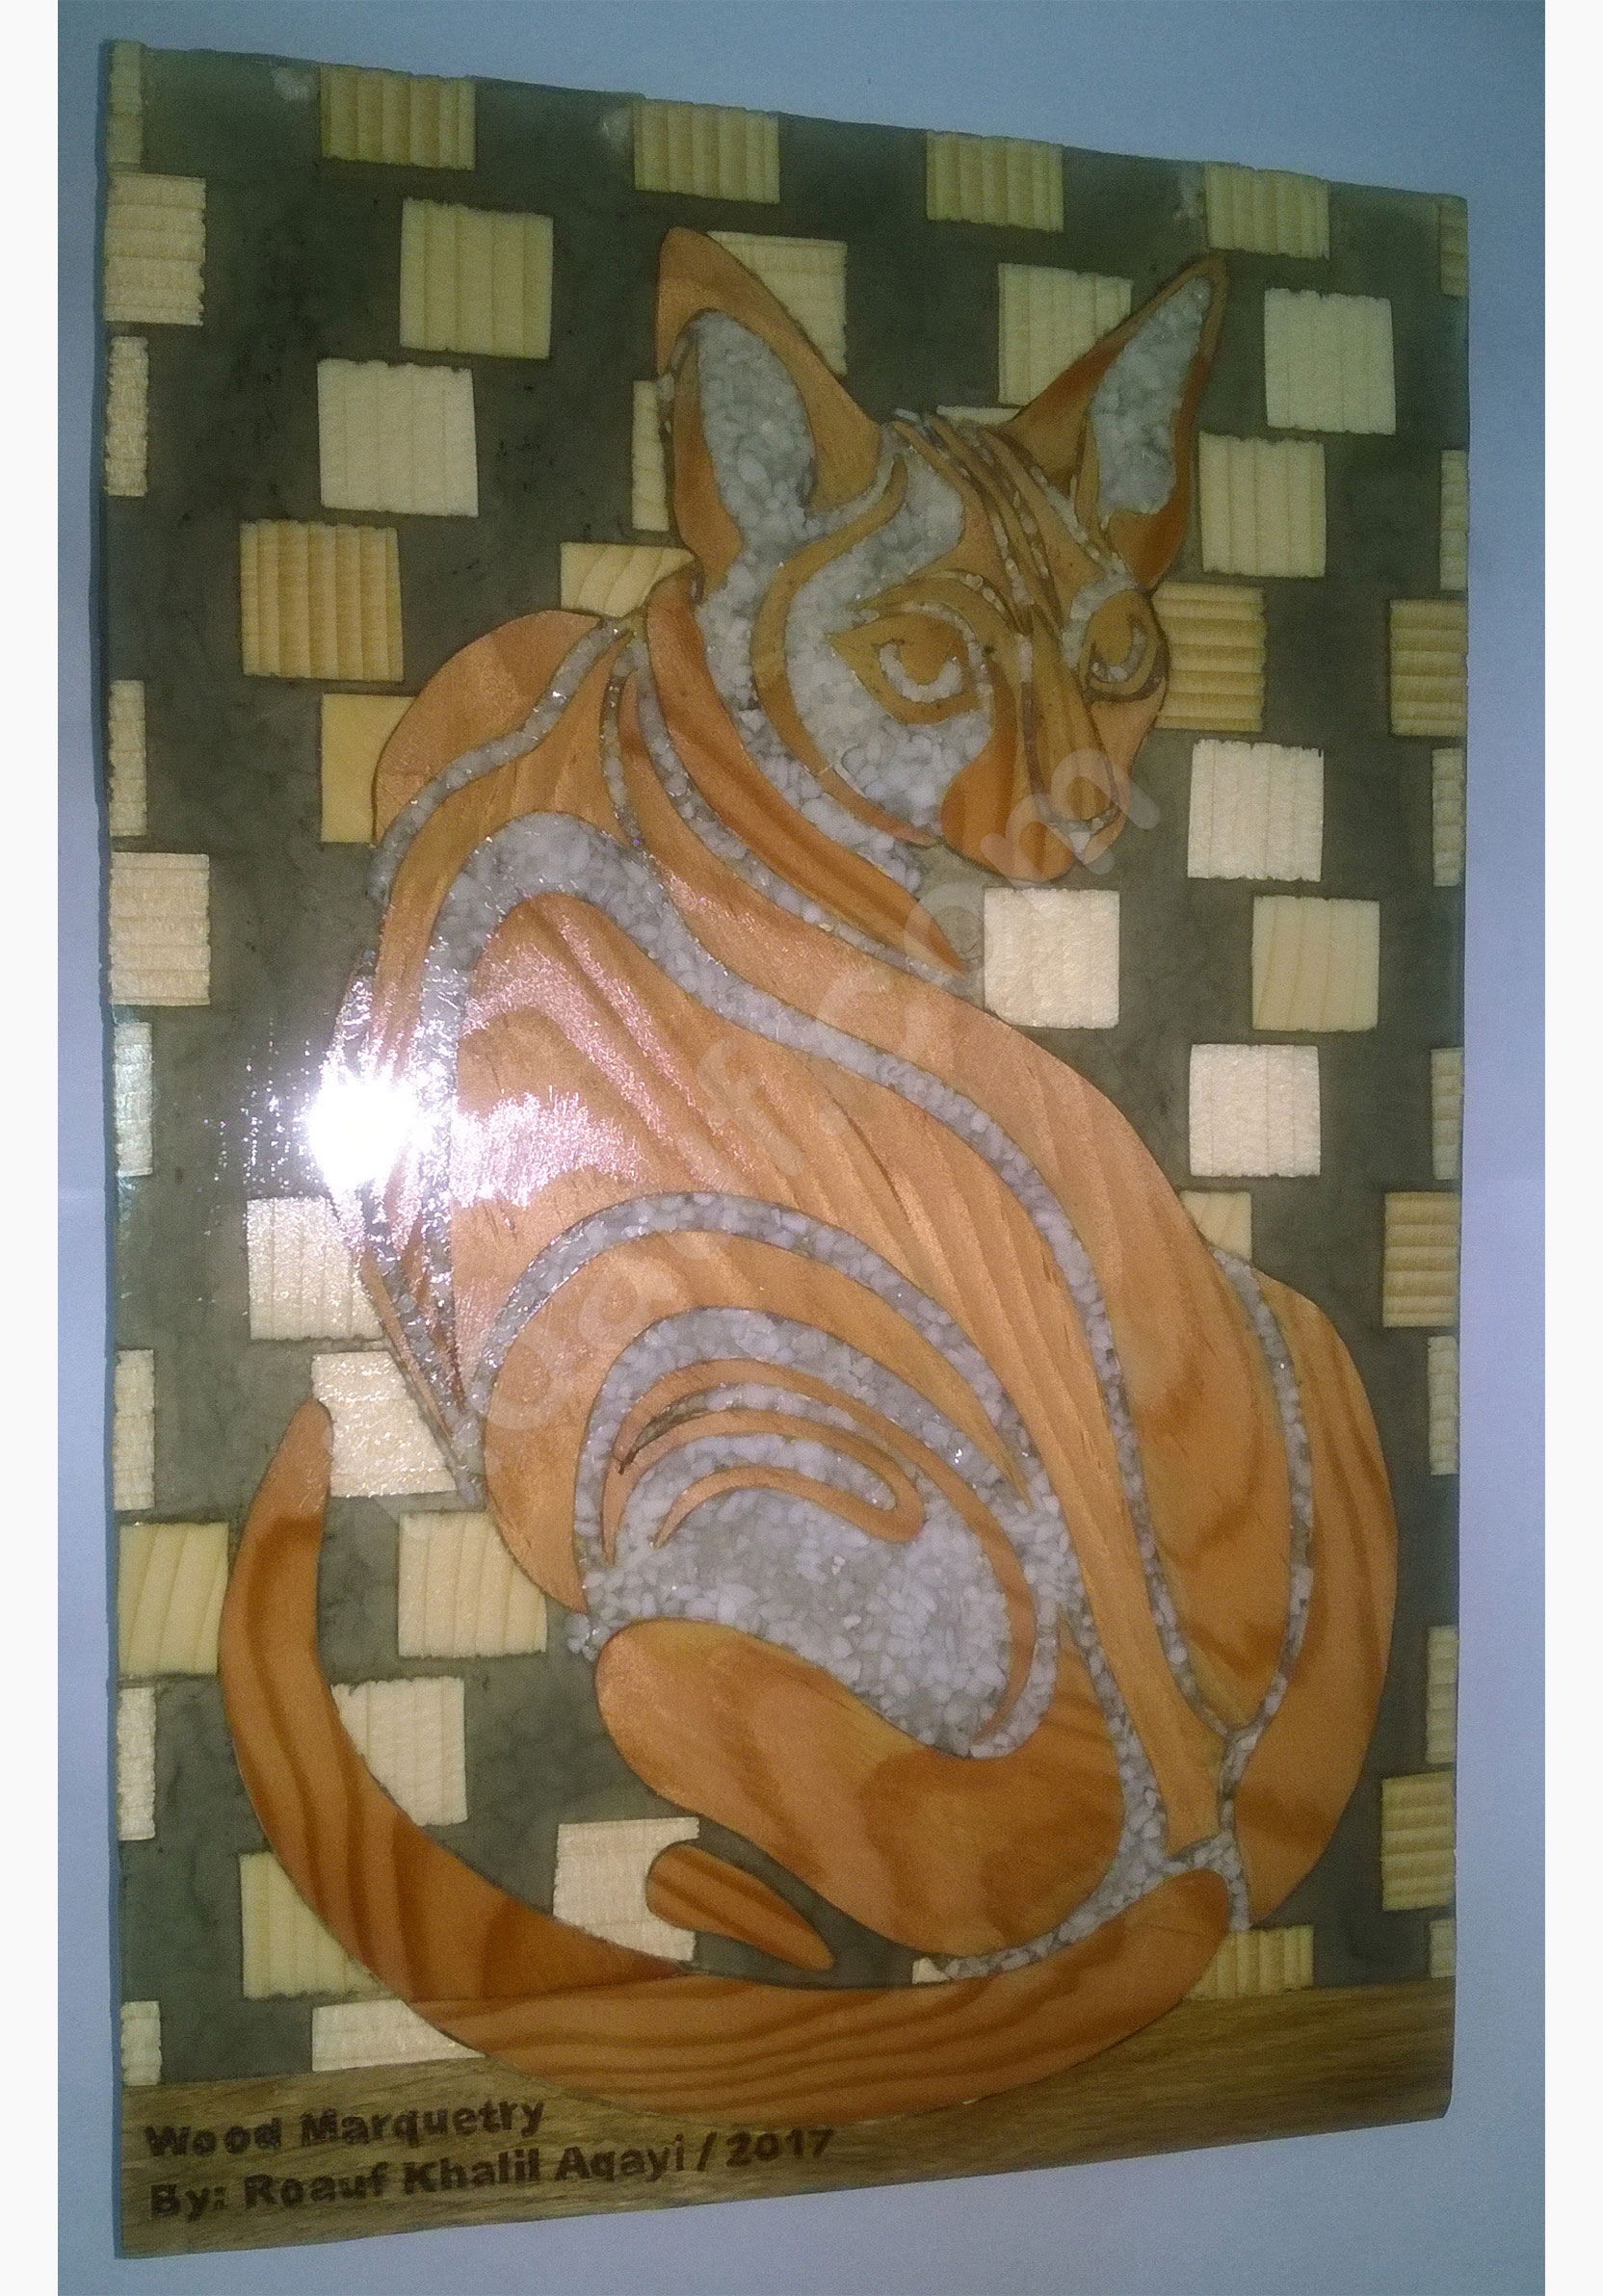 Wood Inlay / Wood Marquetry Panel of a Cat